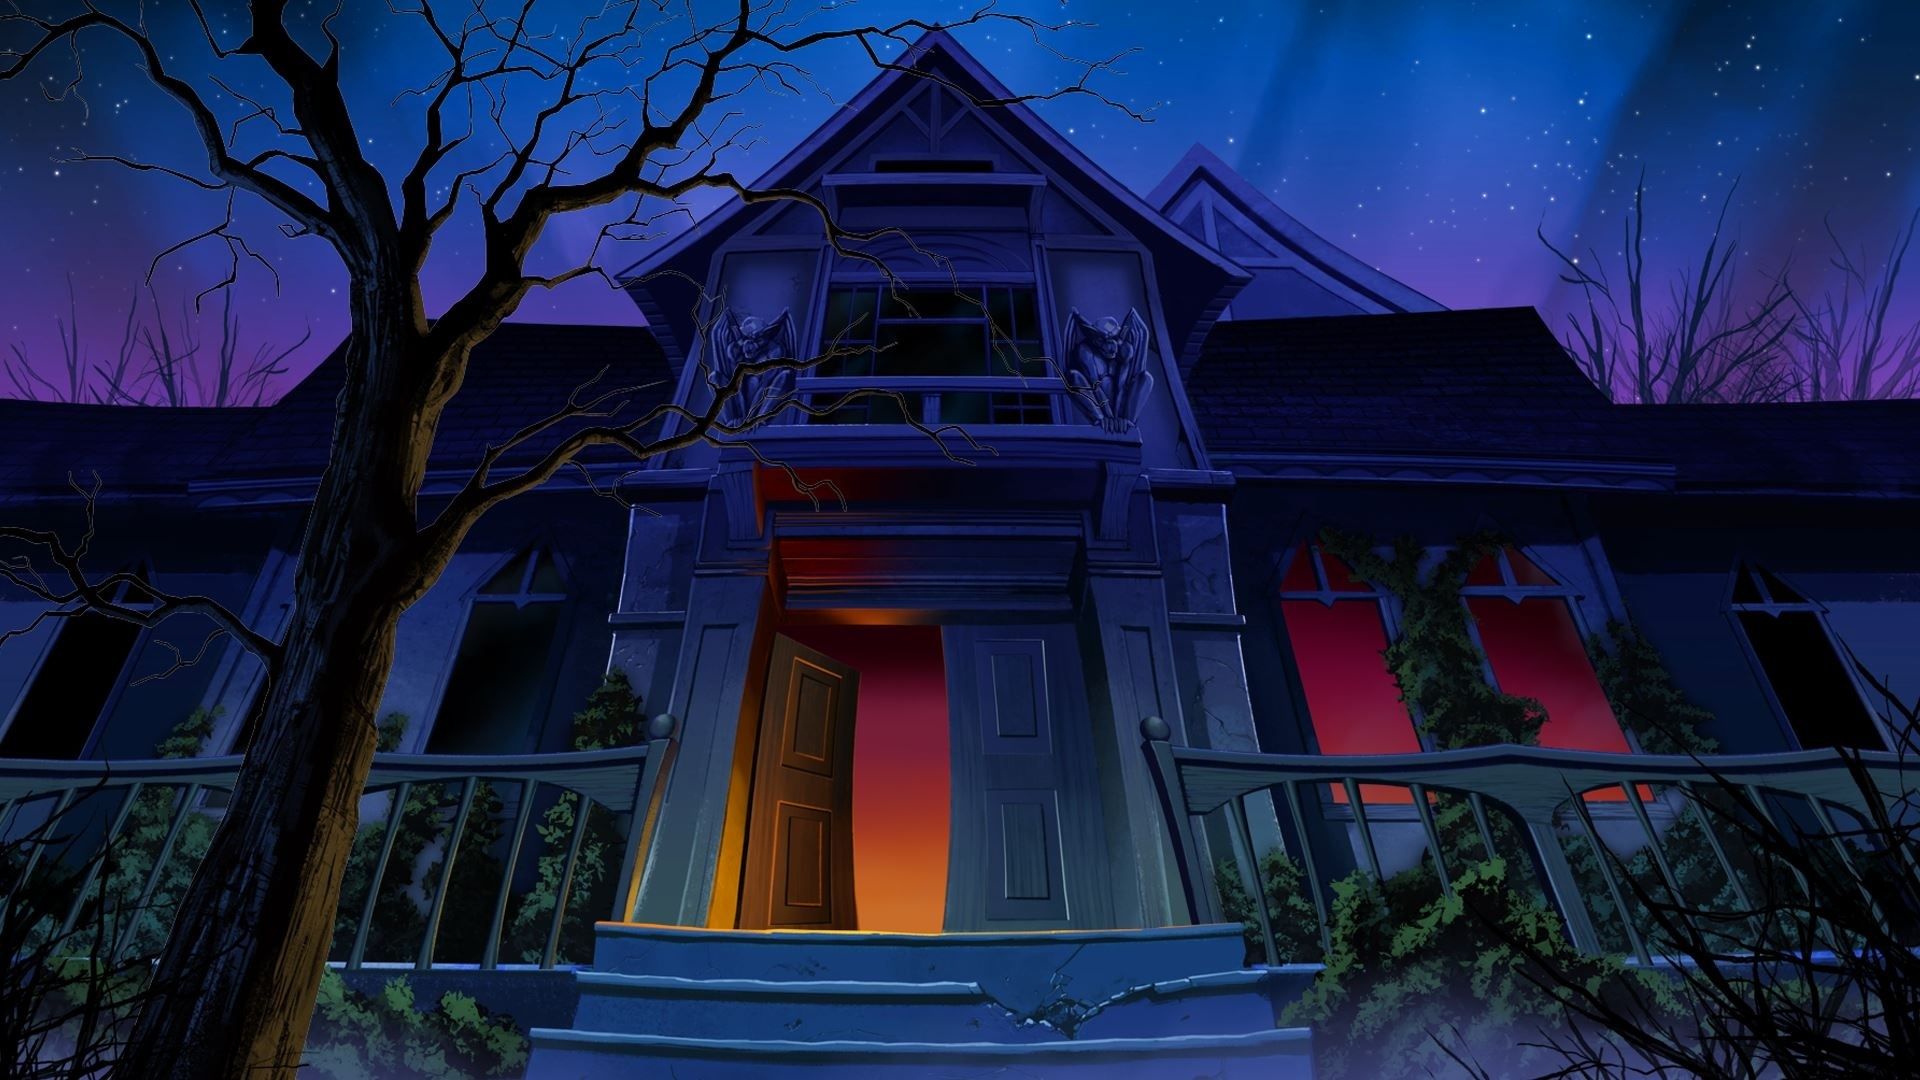 2 Halloween Haunted Houses Wallpaper HD Download Free. Stow Munroe Falls Public Library